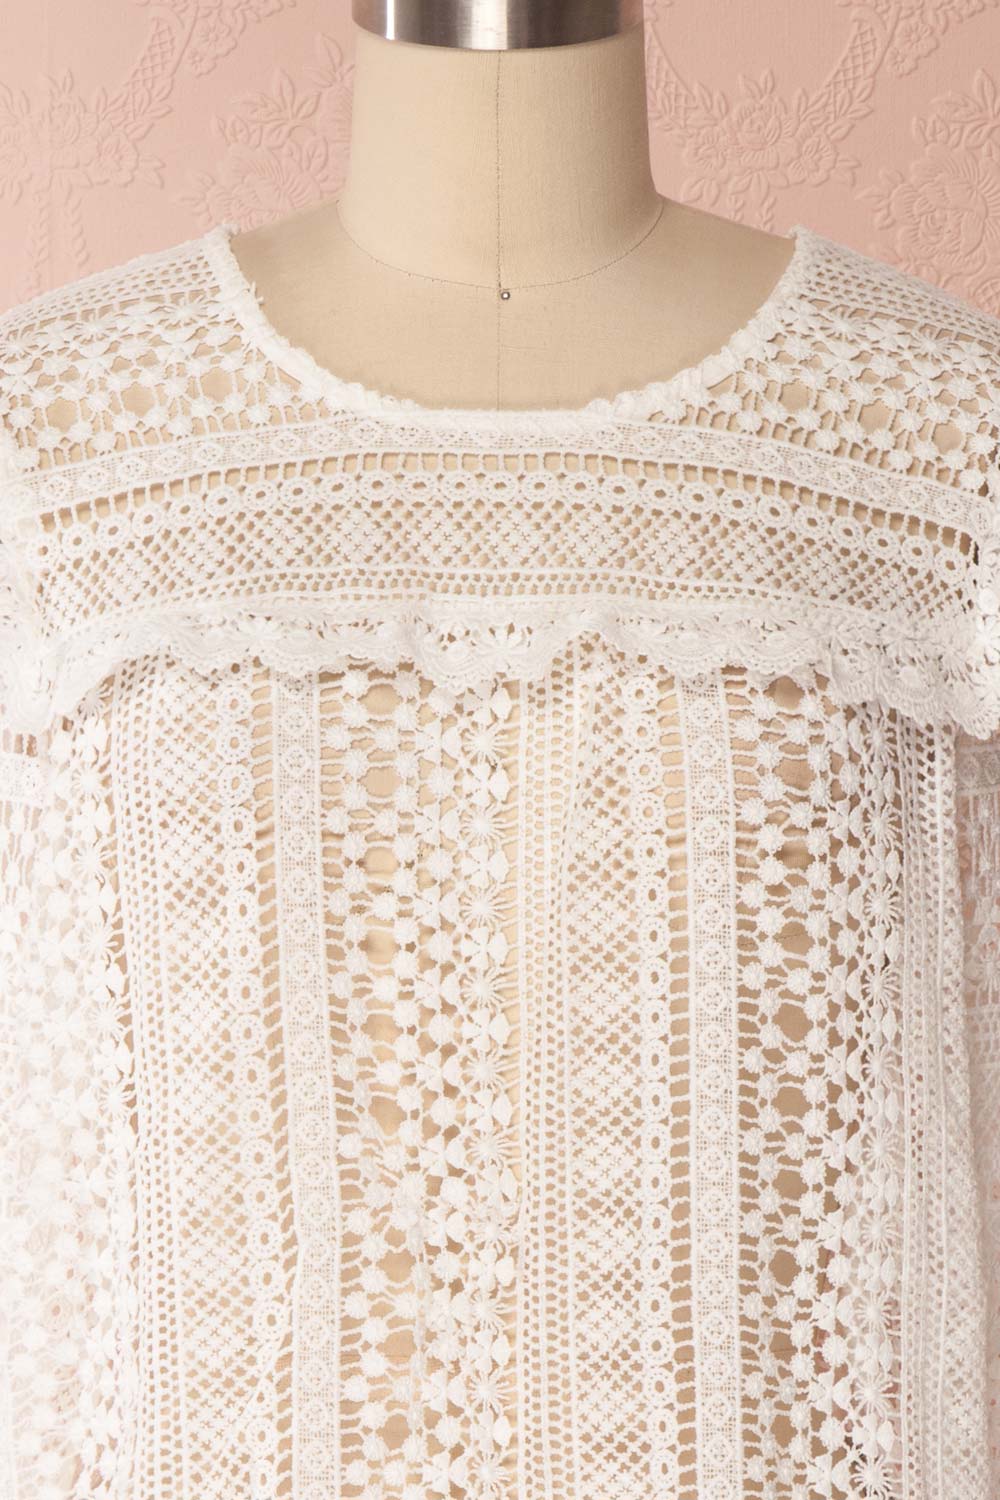 Nina-Lou White Crocheted Lace Long Sleeves Top | Boutique 1861 2